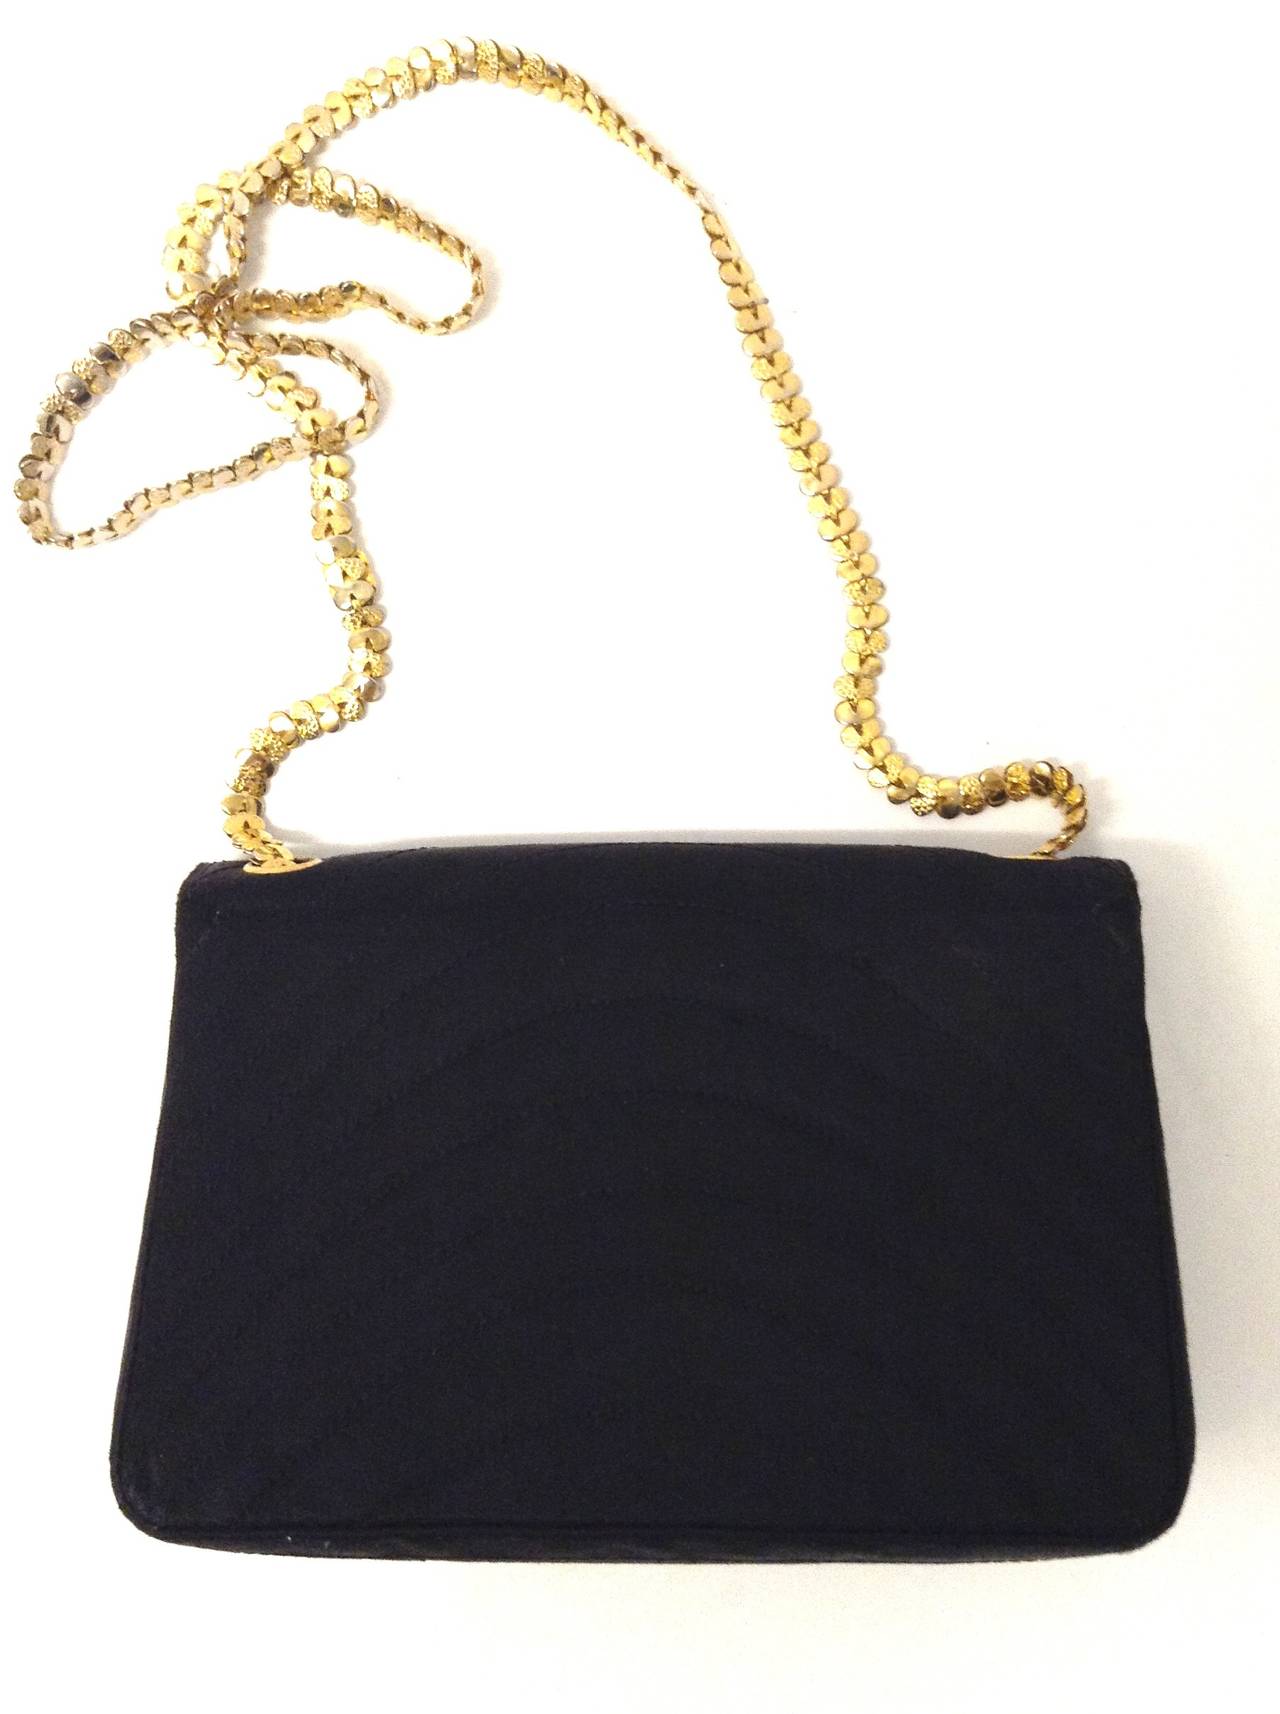 1980s CHANEL Gripoix and silk Flap bag For Sale 2